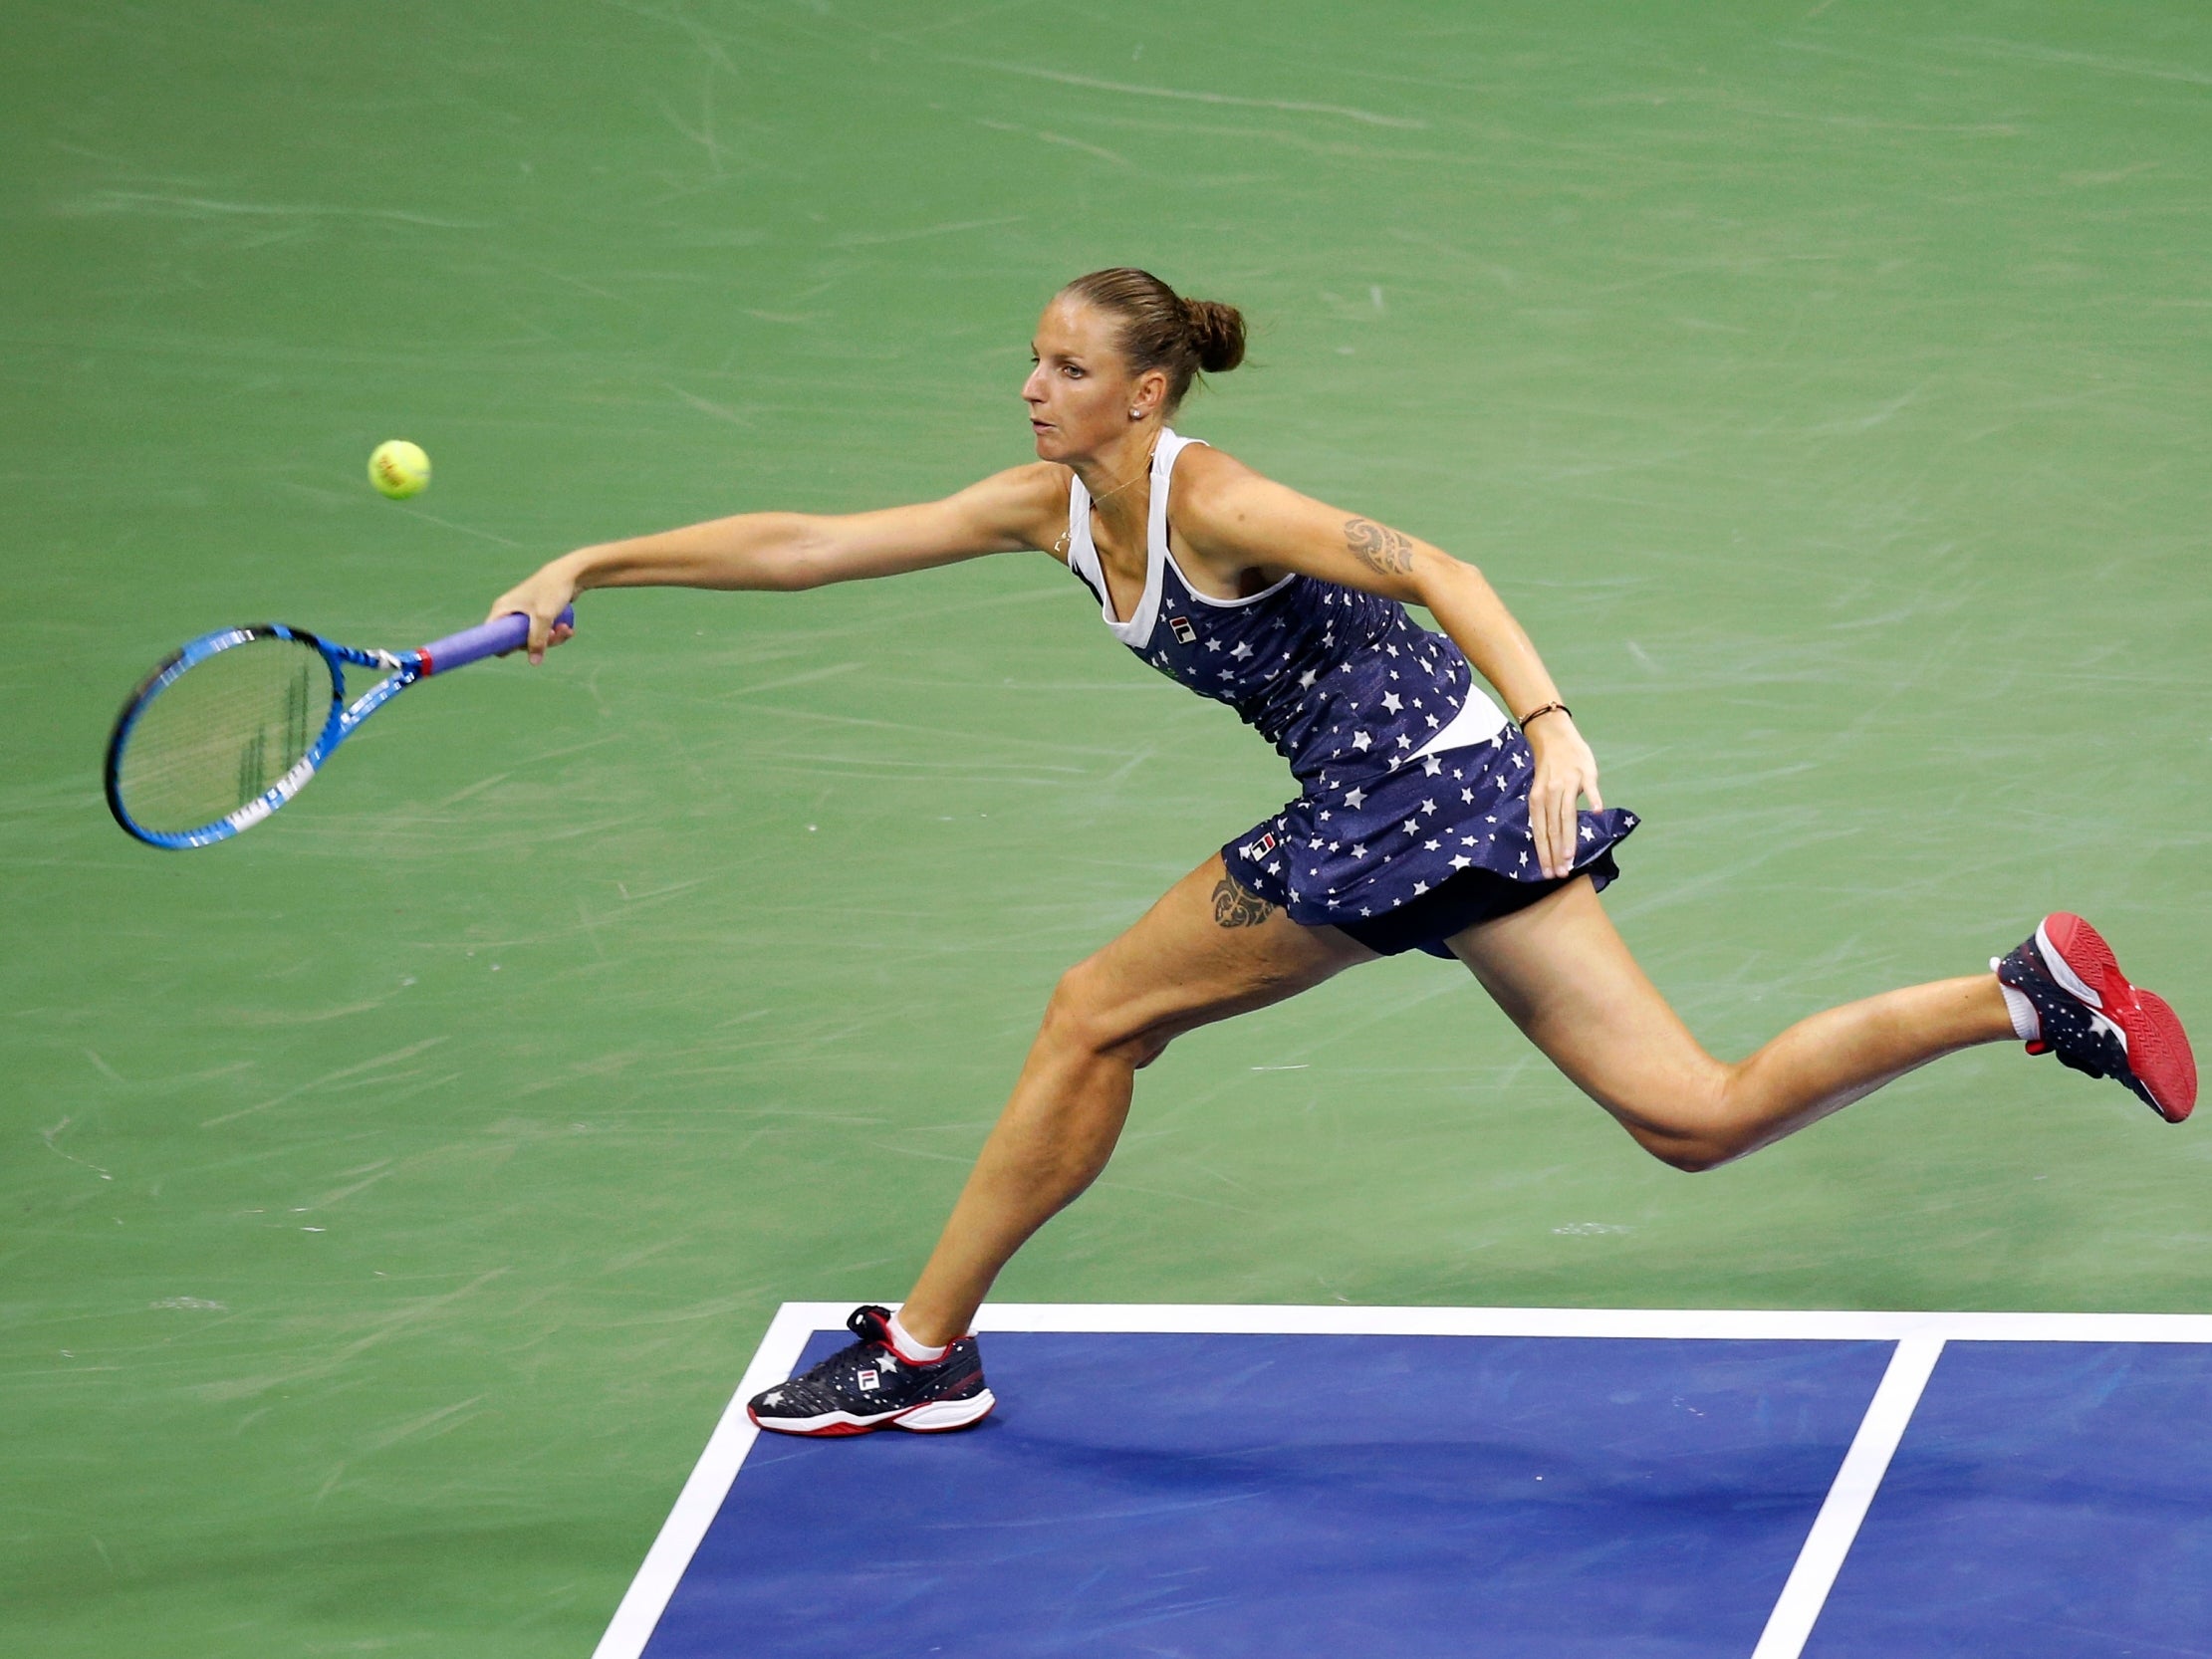 Pliskova was unable to live with the 23-time Grand Slam champion.